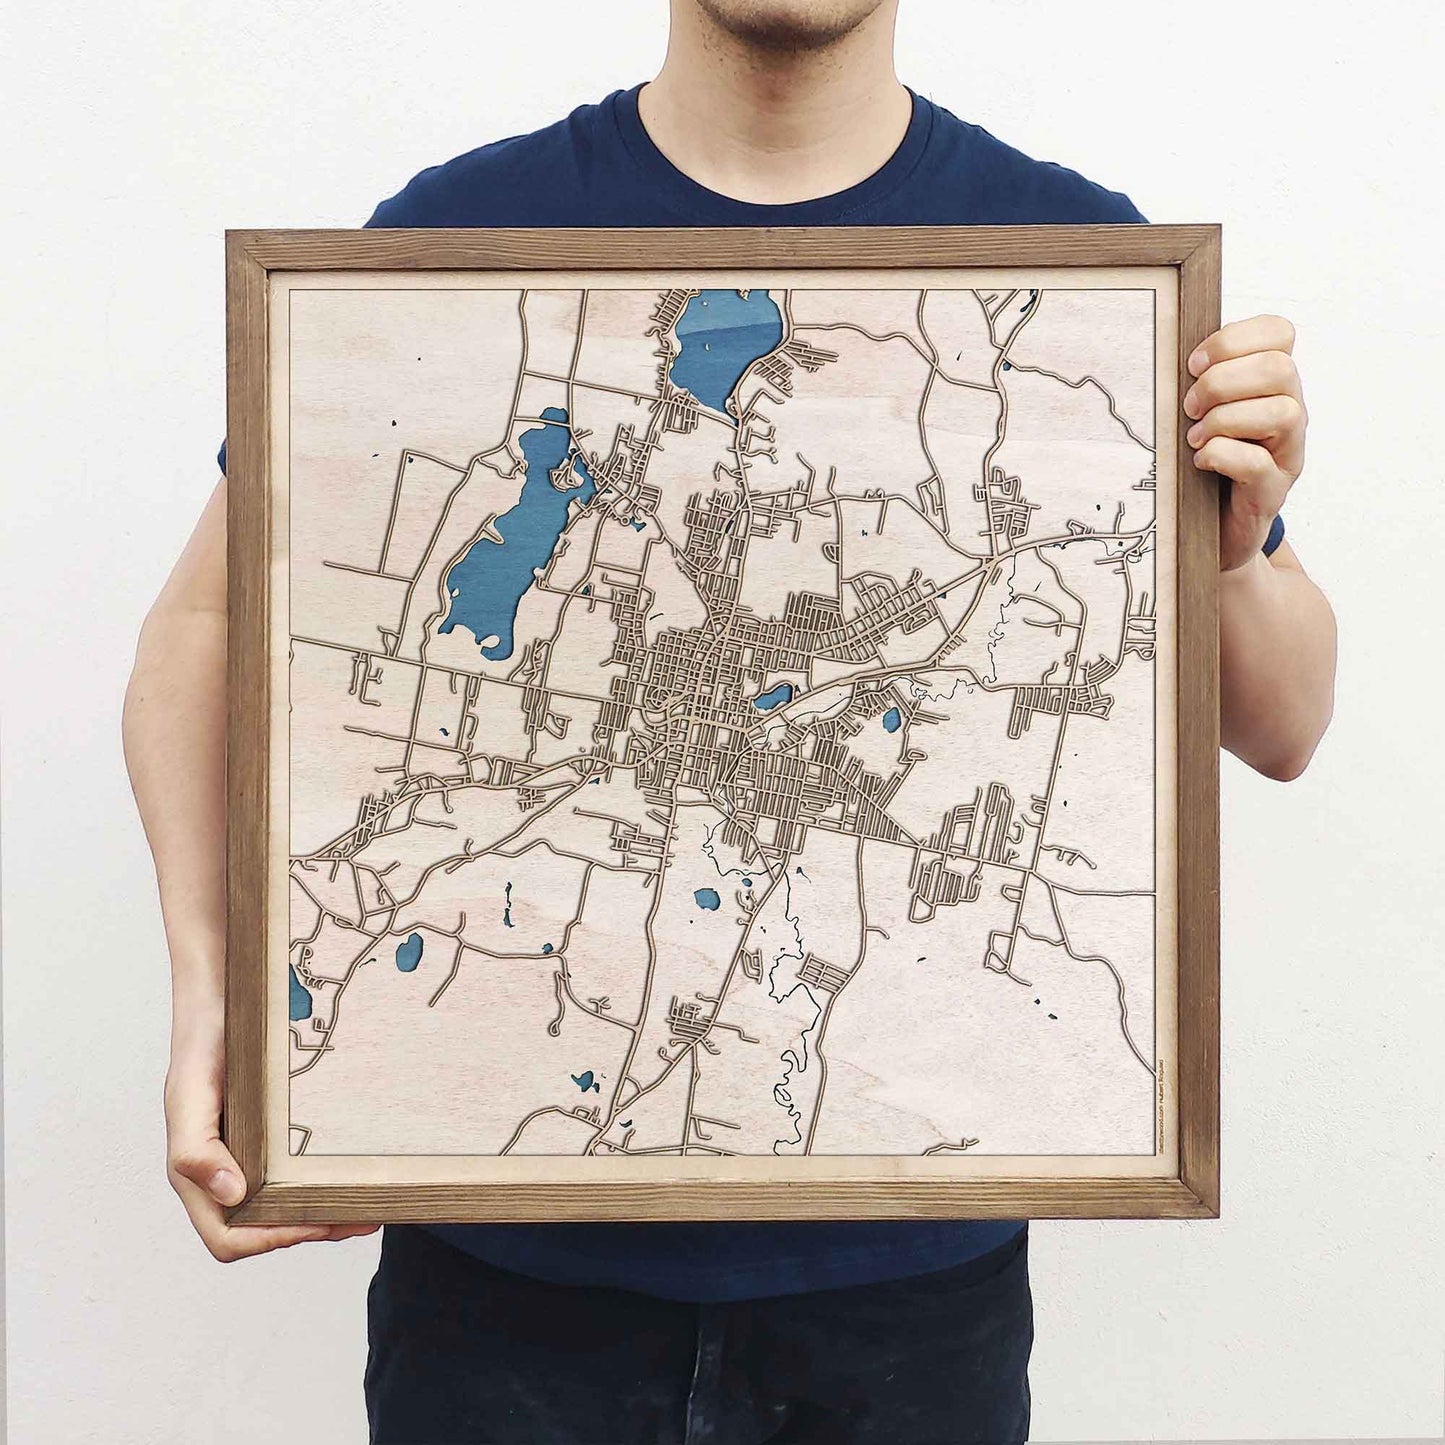 Pittsfield Wooden Map by CityWood - Custom Wood Map Art - Unique Laser Cut Engraved - Anniversary Gift